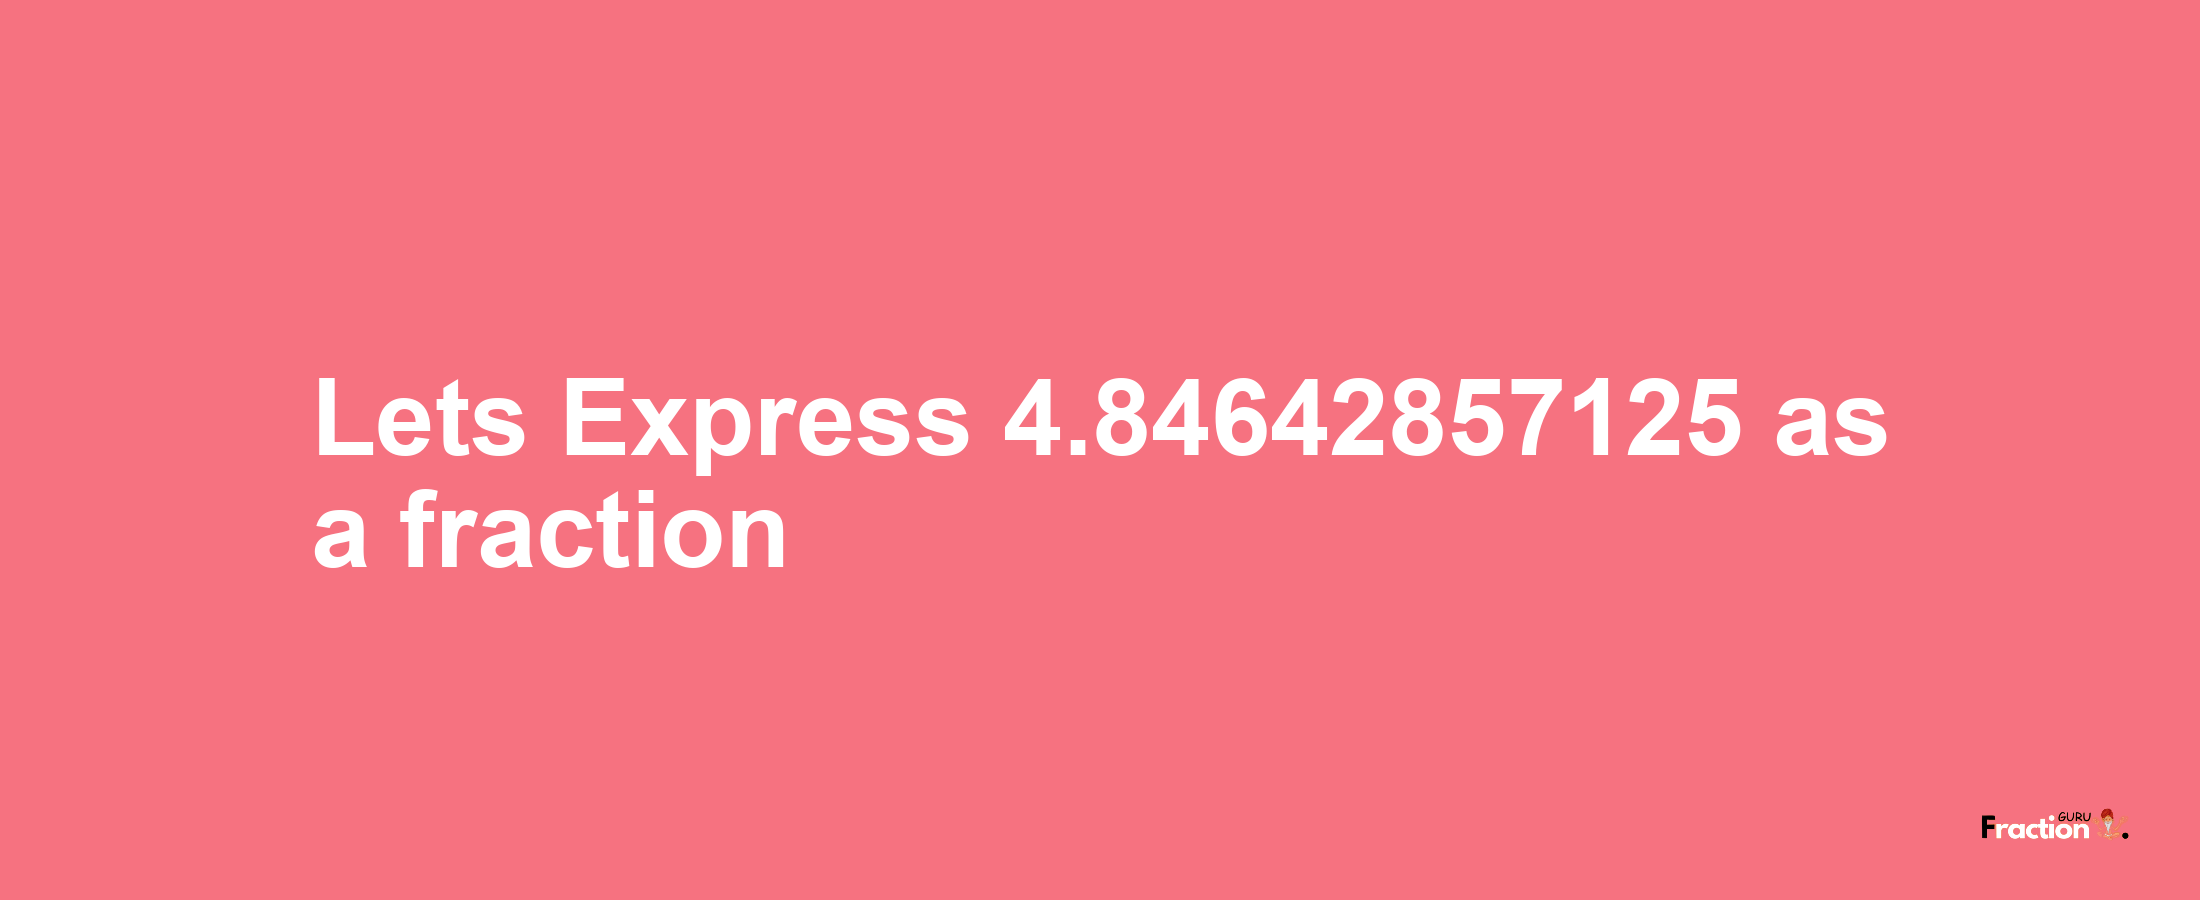 Lets Express 4.84642857125 as afraction